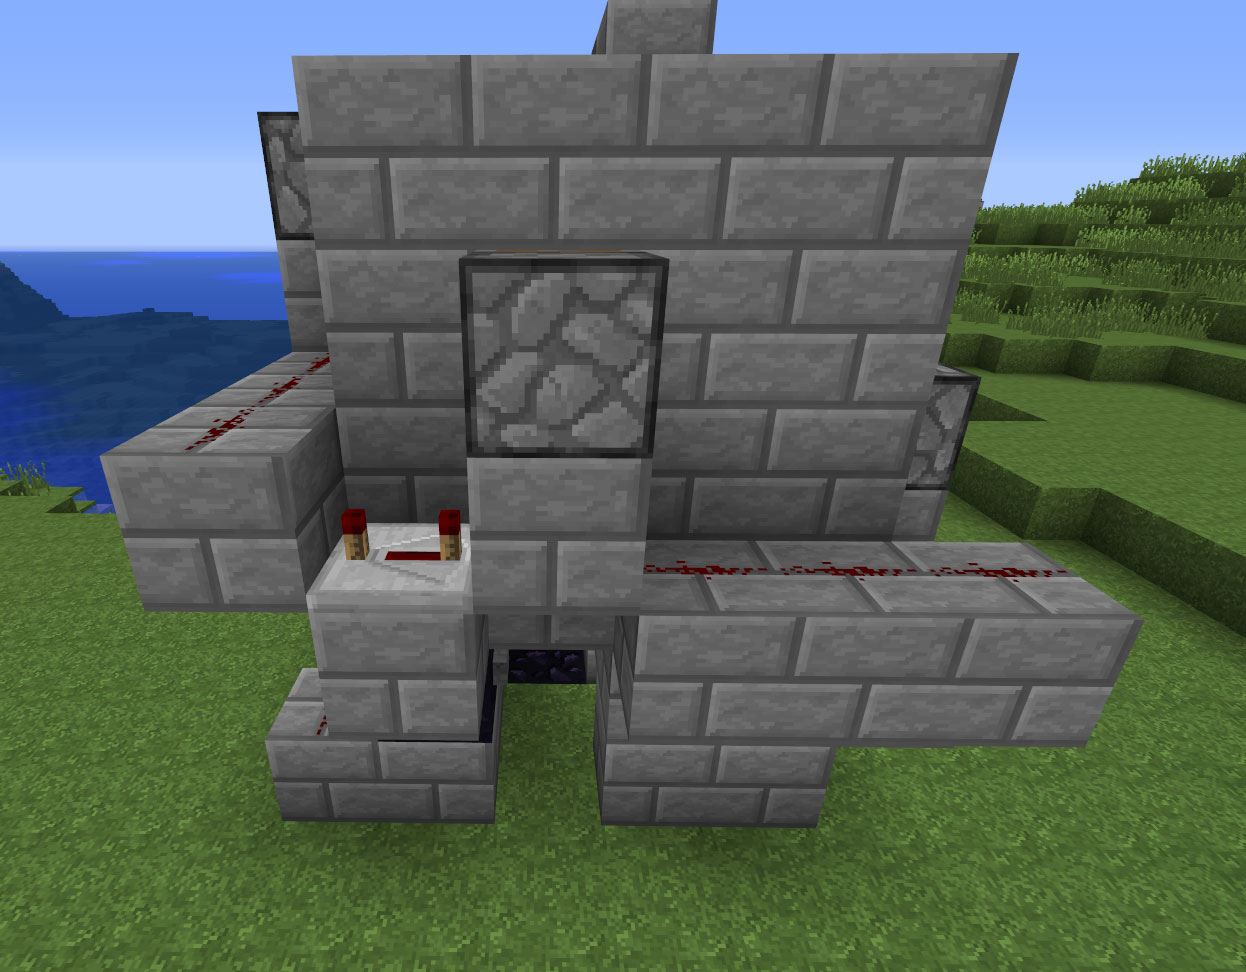 The Fastest Way to the Top: How to Build a Redstone Elevator in Minecraft